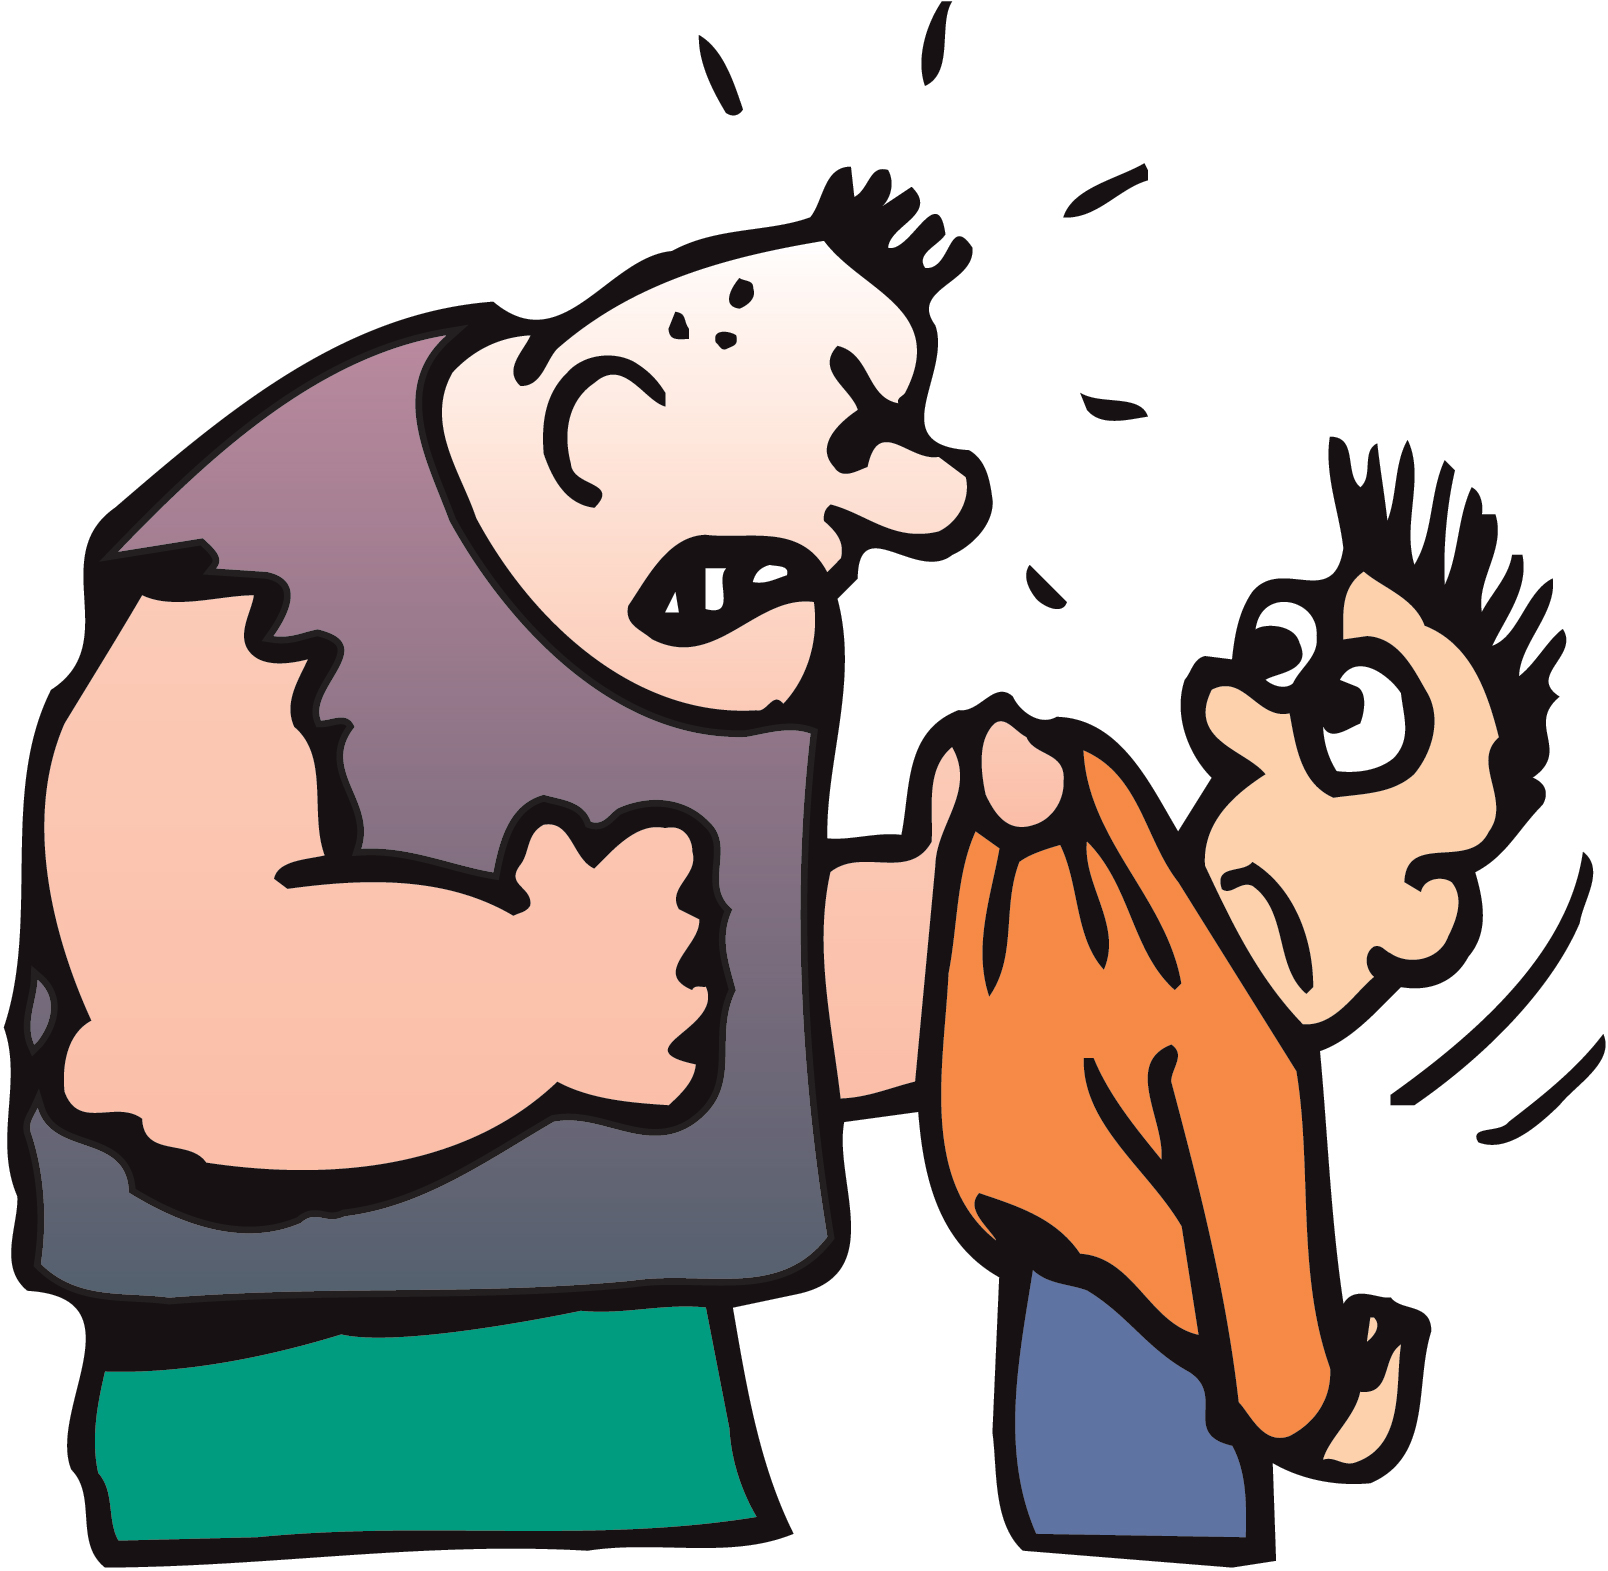 Free Bully Cartoon Pictures, Download Free Clip Art, Free.